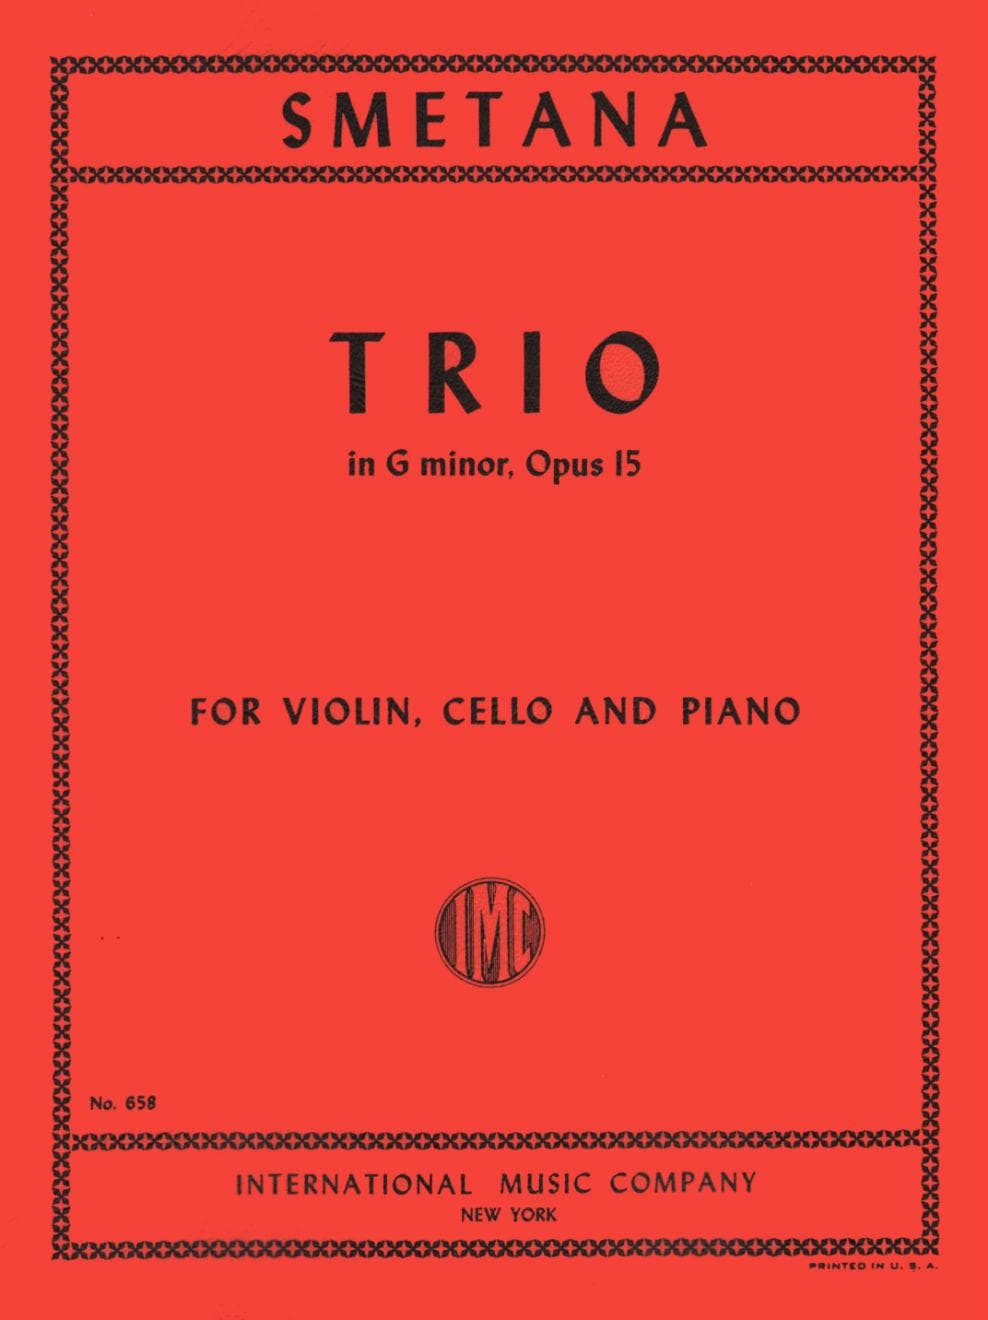 Smetana, Bed?ich - Piano Trio in g minor, Op 15 - Violin, Cello, and Piano - Published by International Music Company